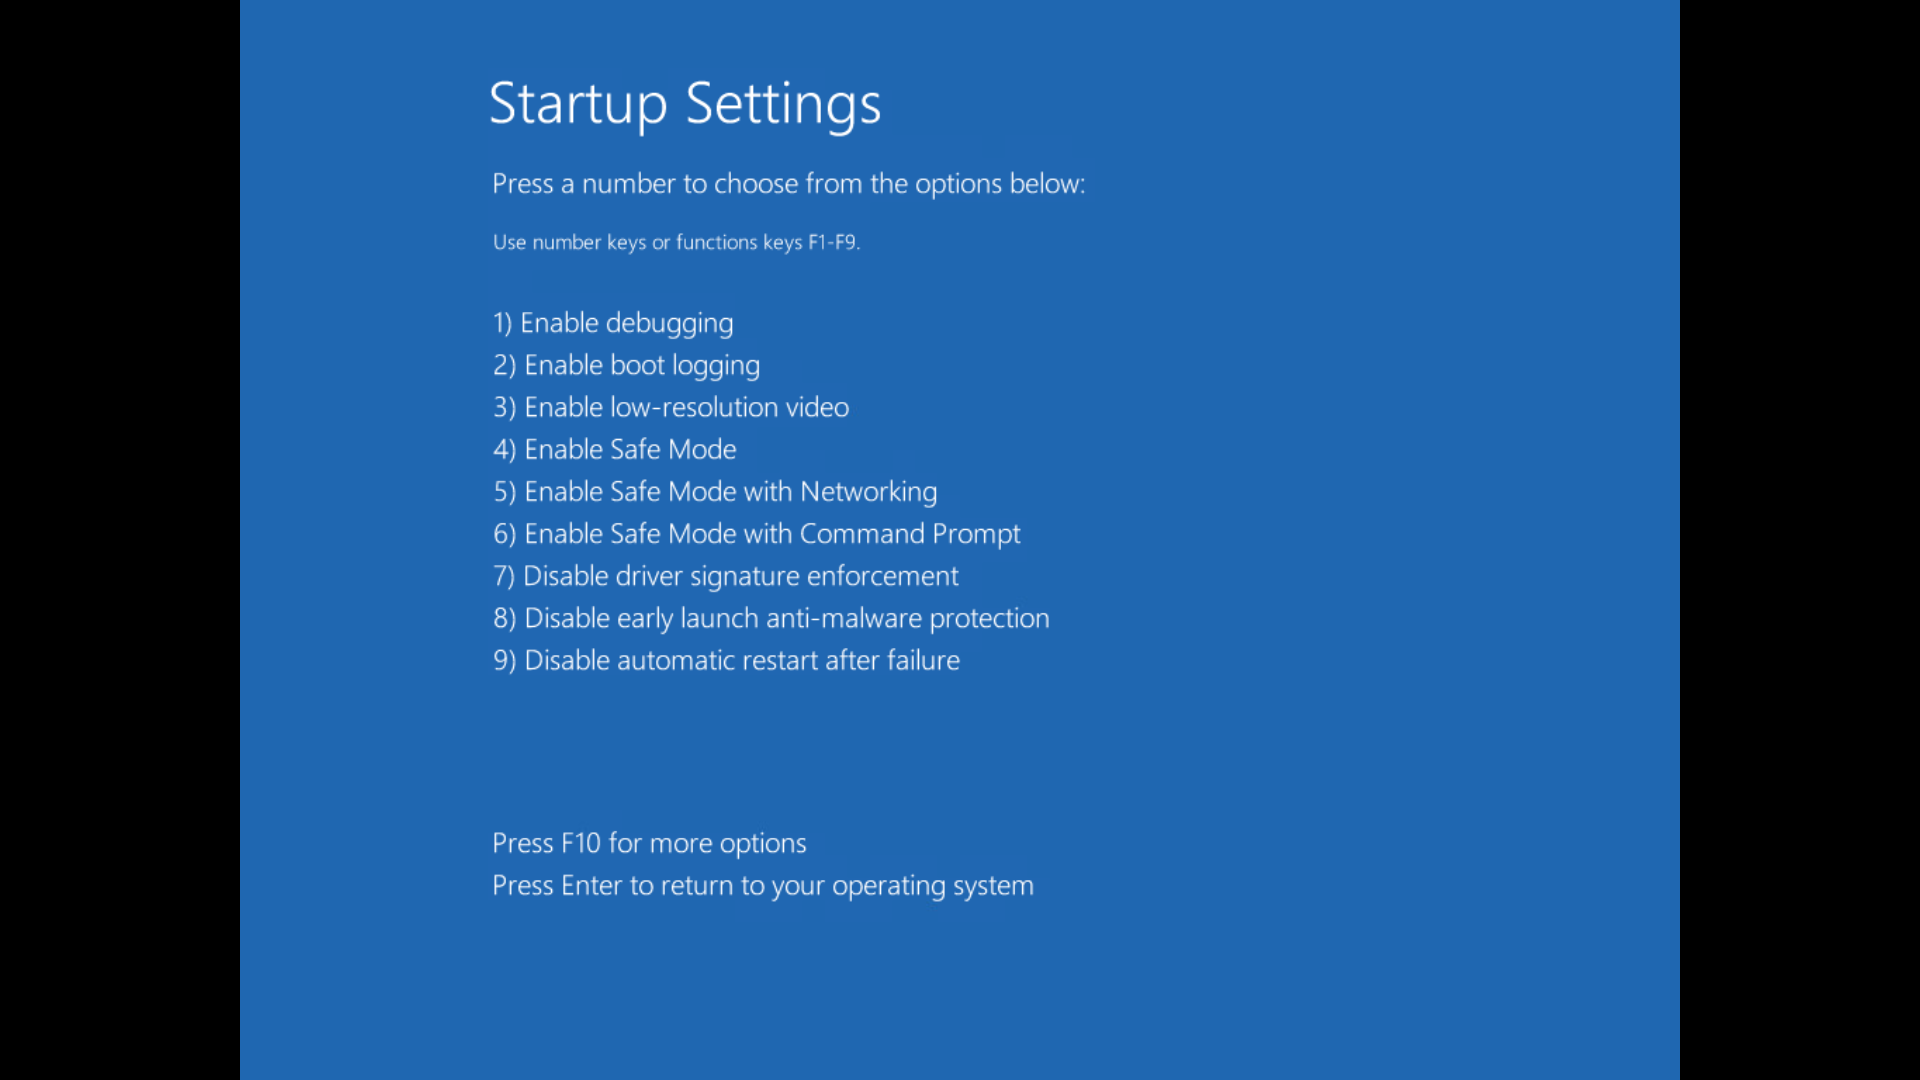 A list of startup settings for a troubleshooting reboot of Windows